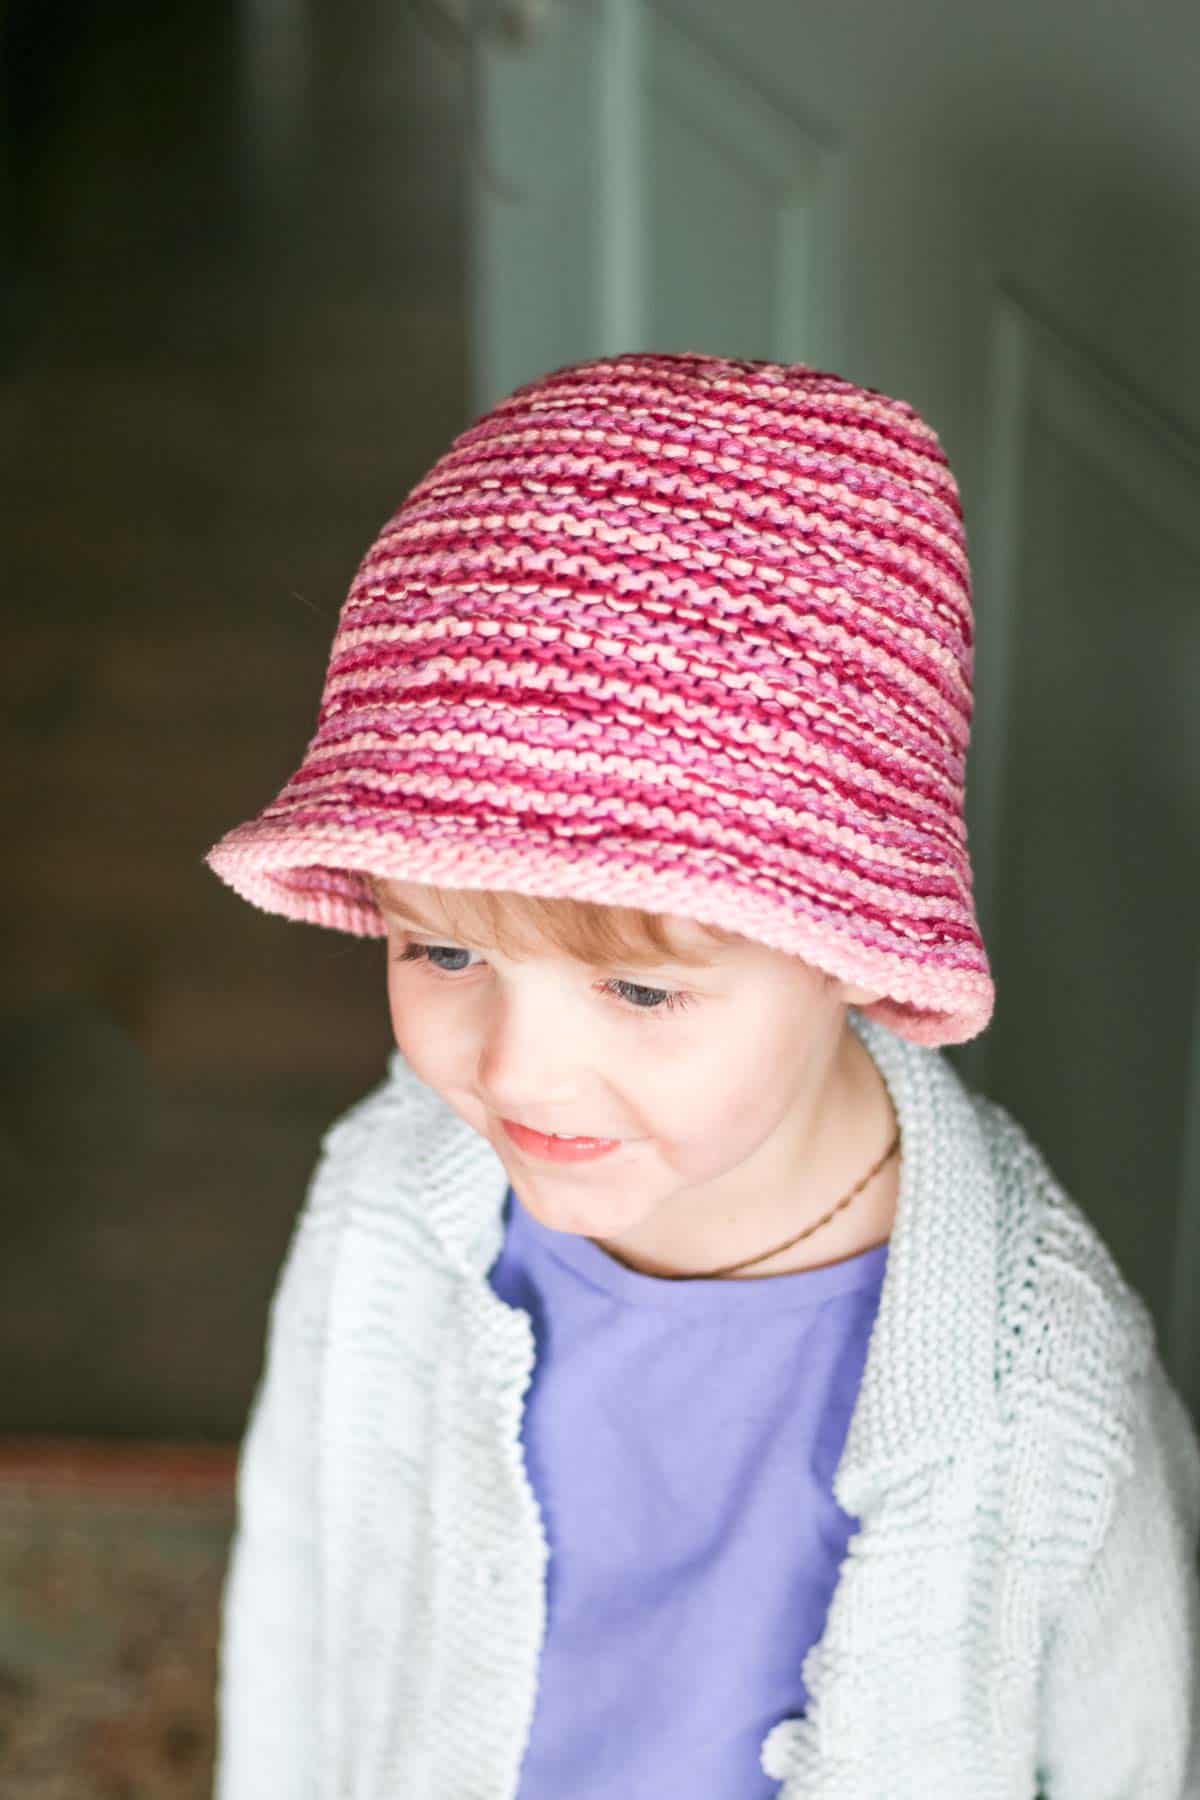 Toddler wearing a knit bucket hat.